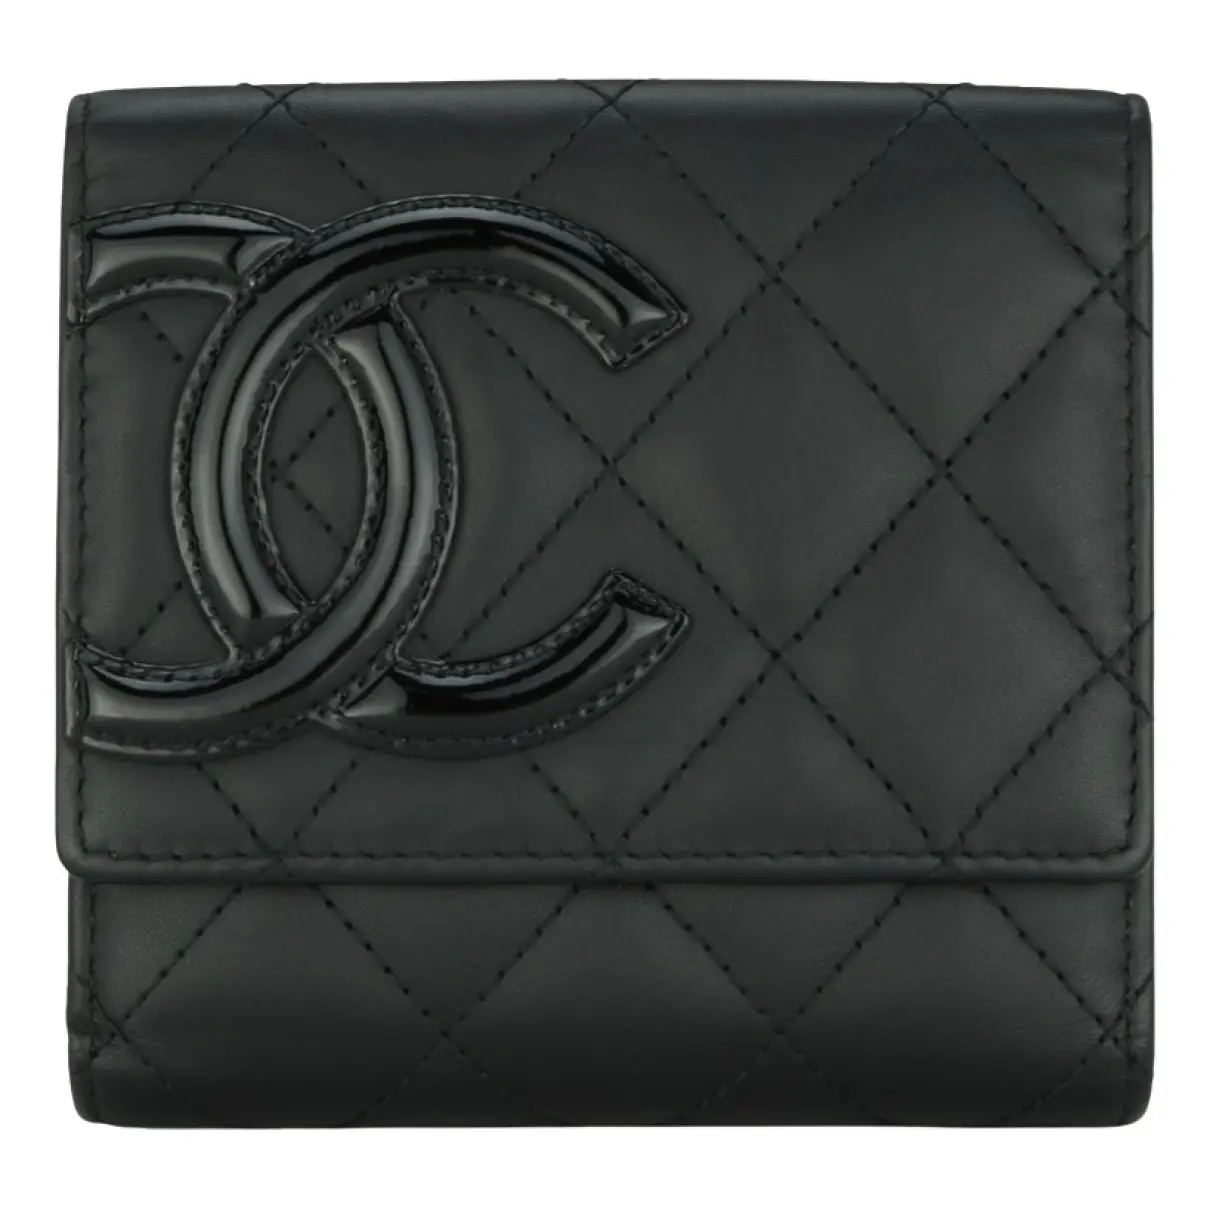 Cambon leather wallet